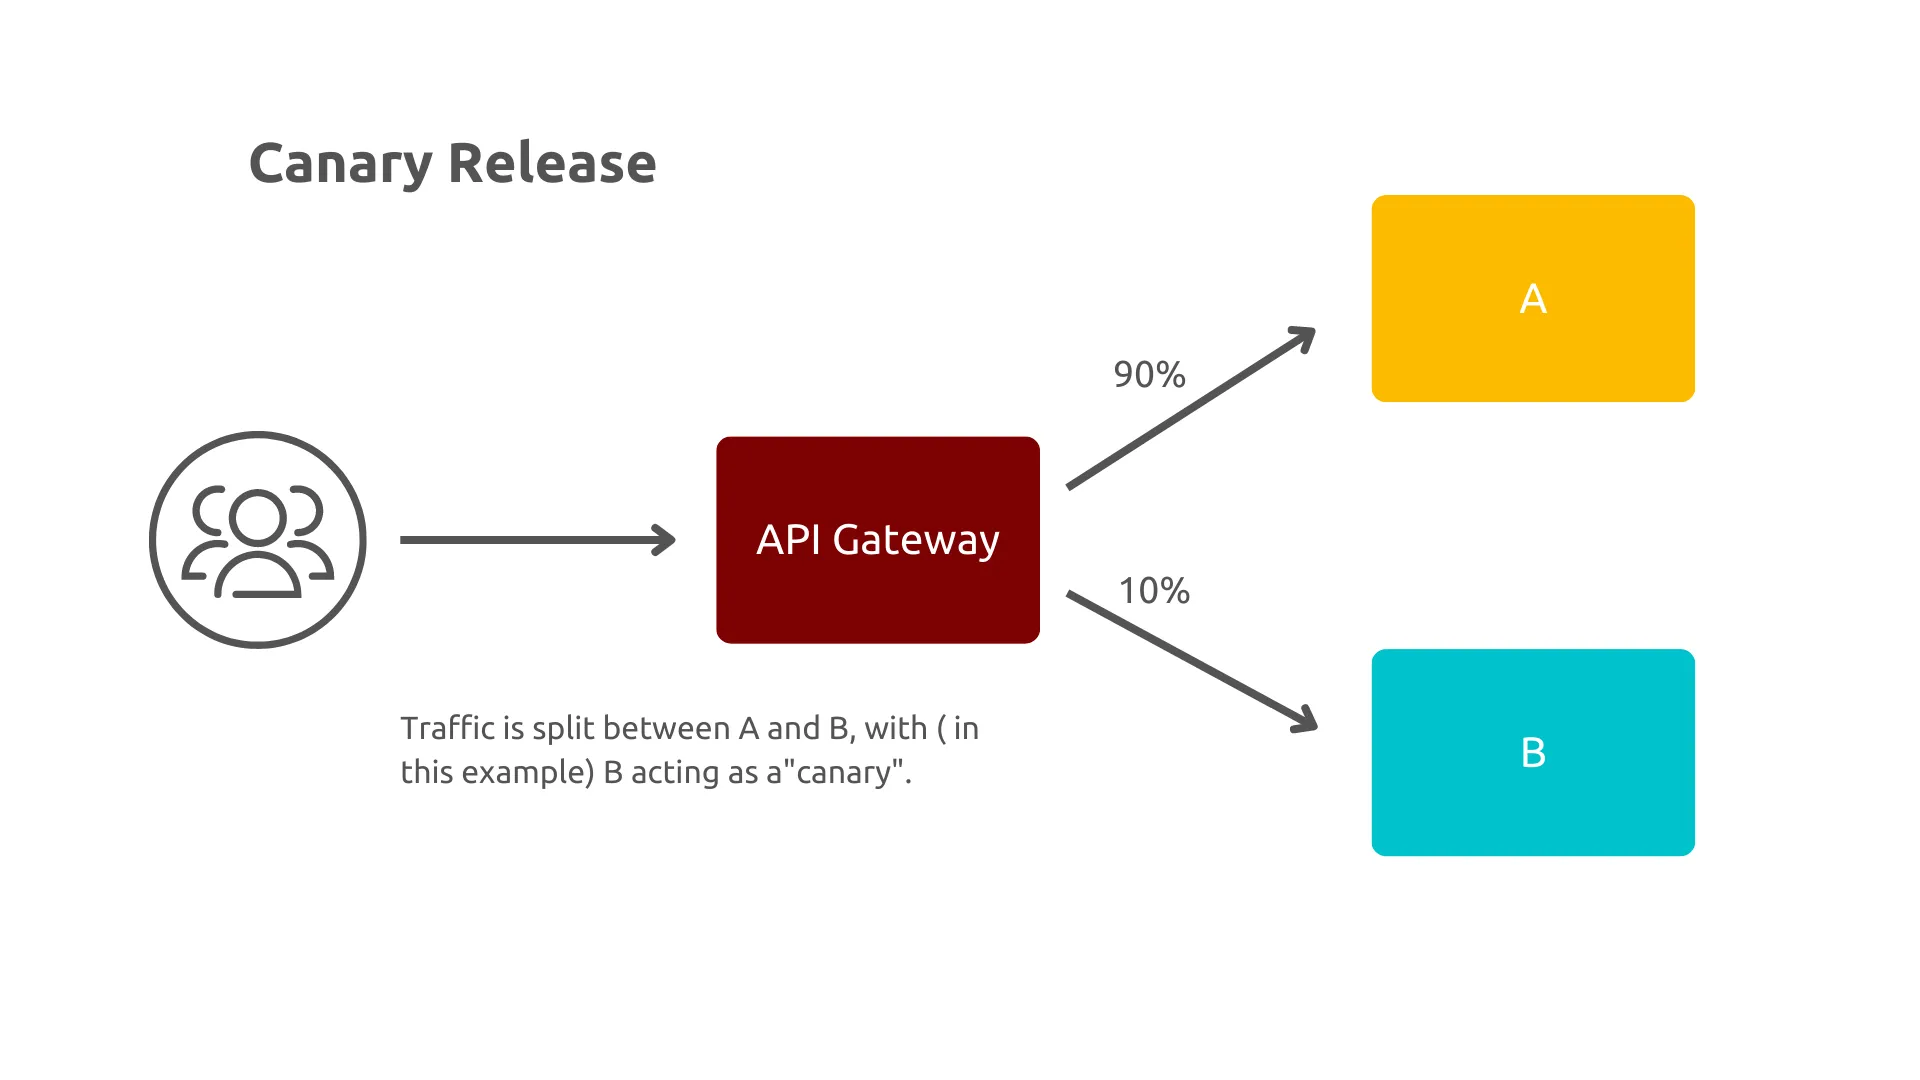 Reinvent your release strategy with an API gateway